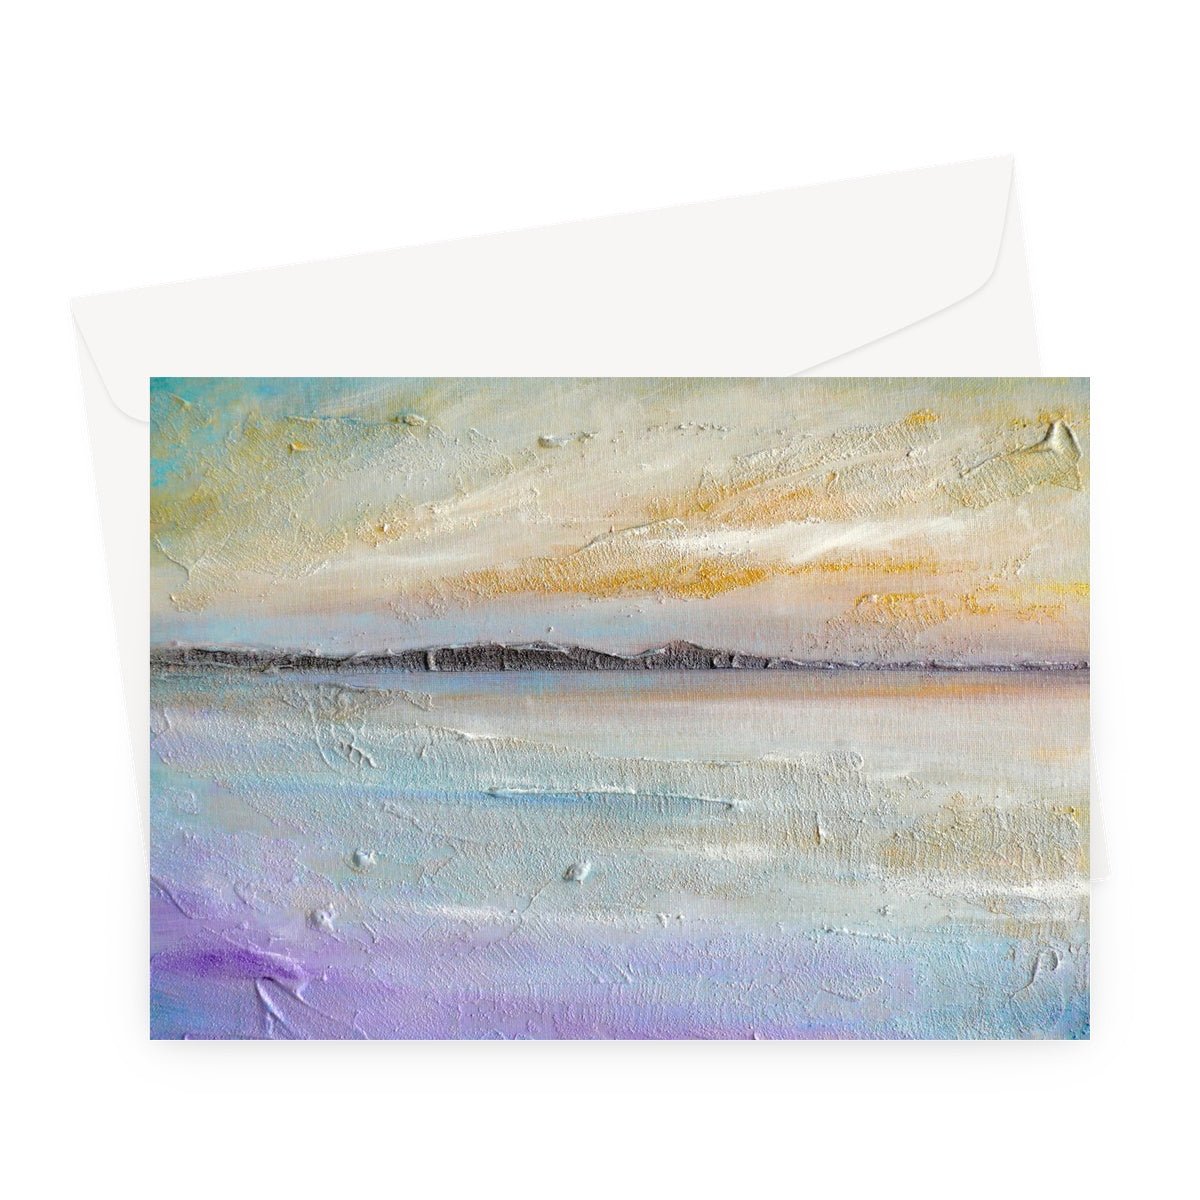 Sollas Beach South Uist Art Gifts Greeting Card-Greetings Cards-Hebridean Islands Art Gallery-A5 Landscape-1 Card-Paintings, Prints, Homeware, Art Gifts From Scotland By Scottish Artist Kevin Hunter